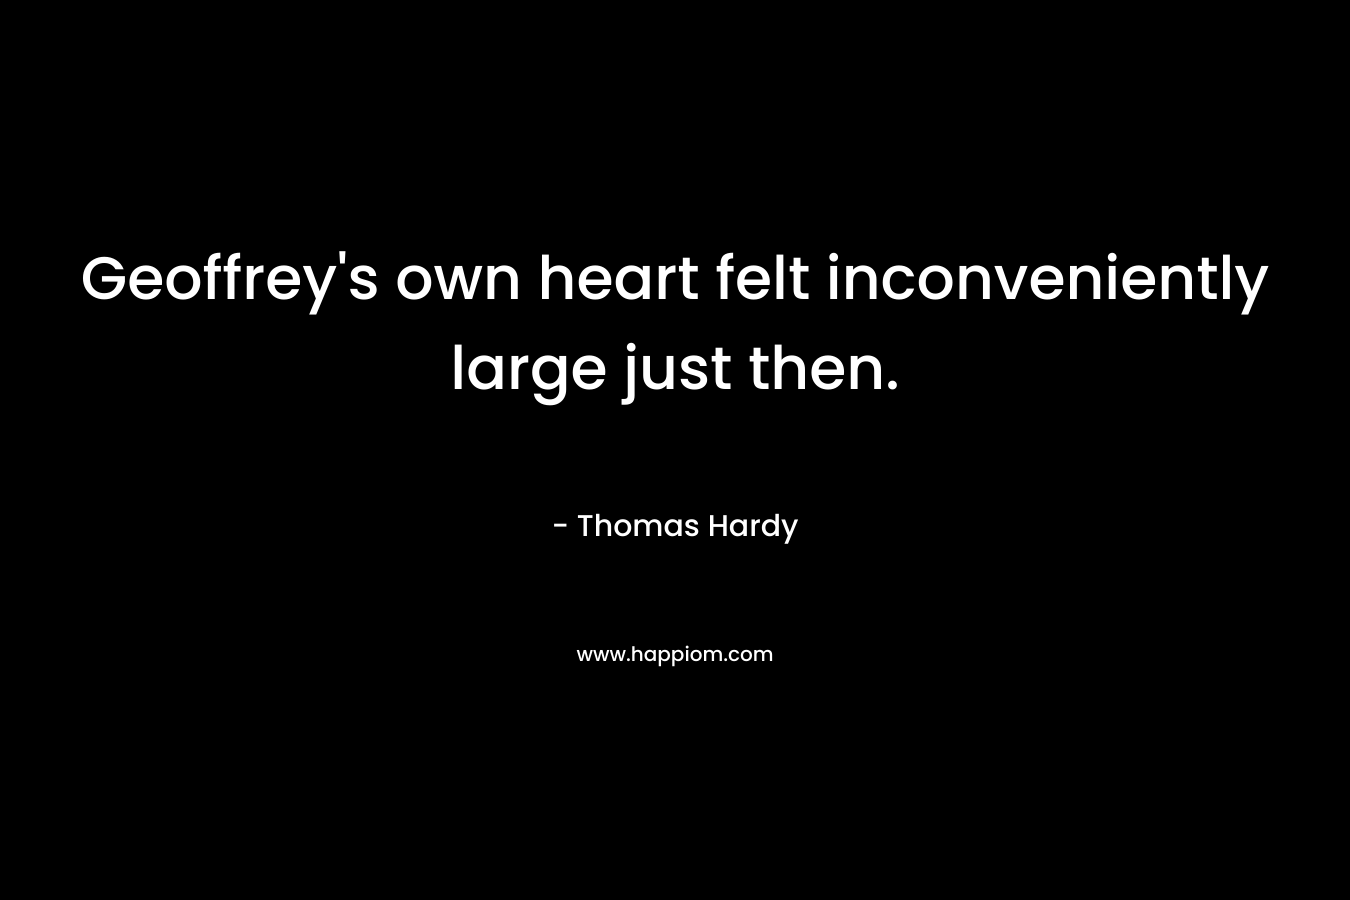 Geoffrey’s own heart felt inconveniently large just then. – Thomas Hardy